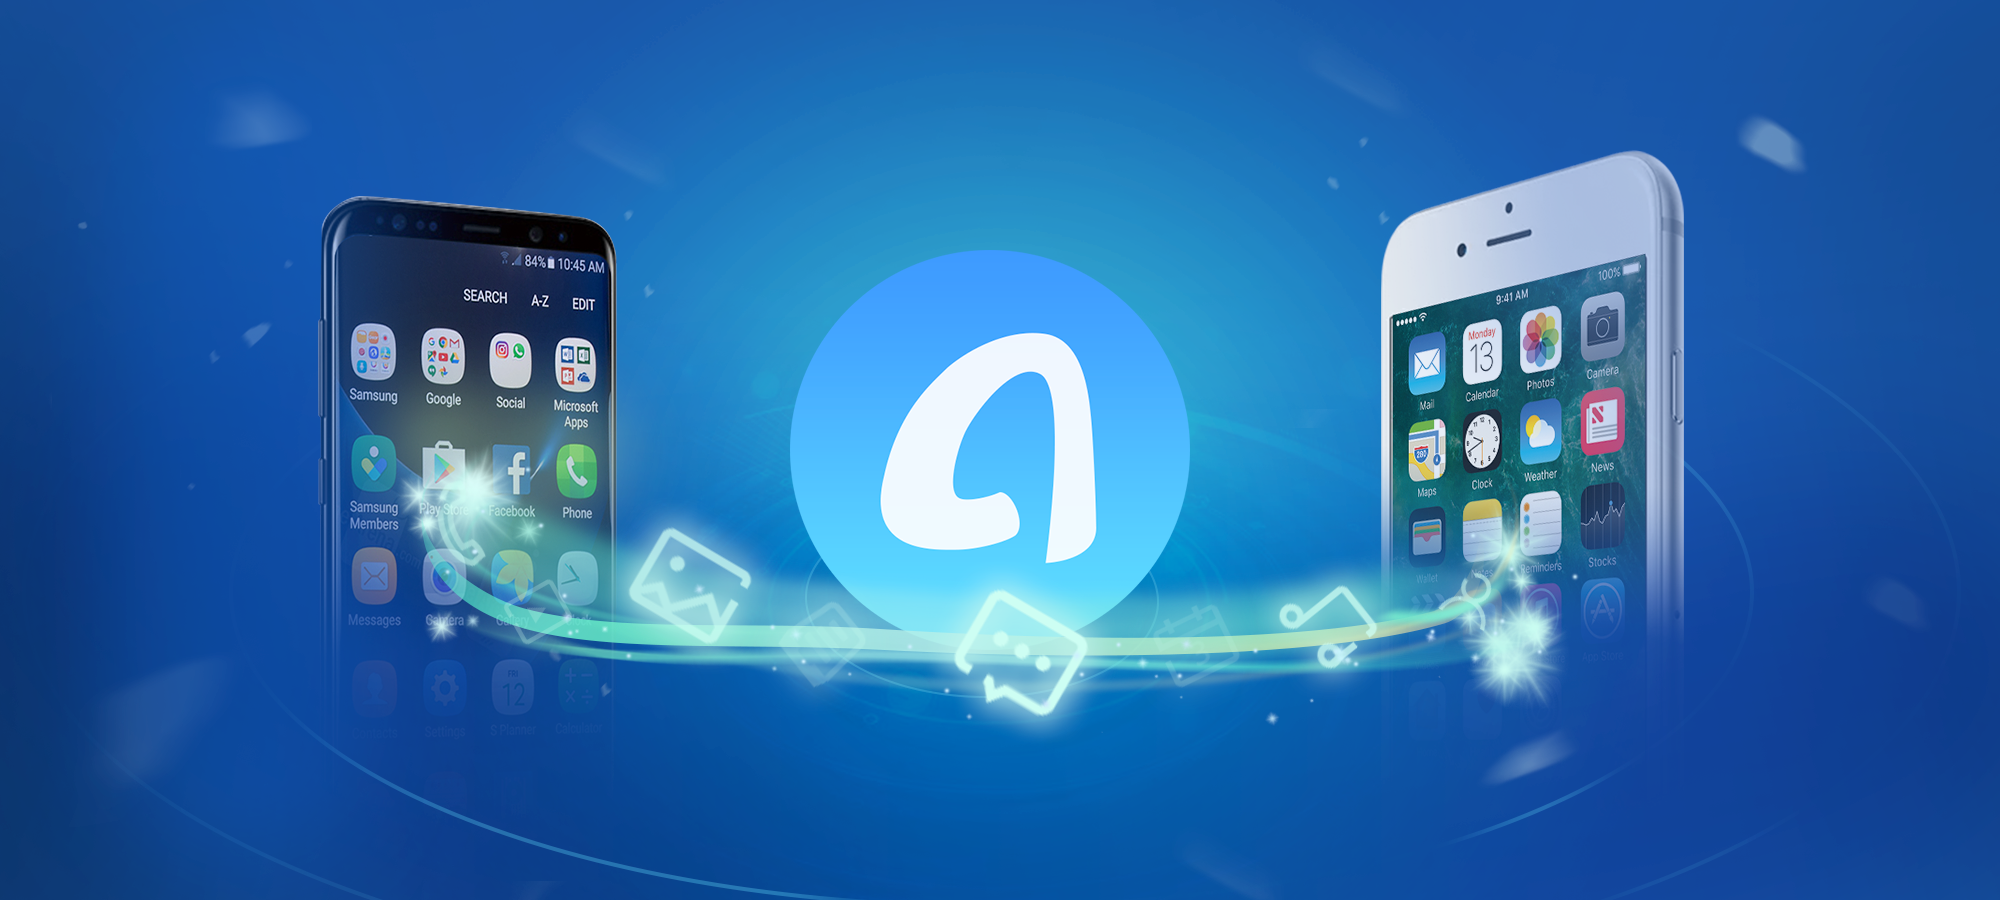 instal the new version for android AnyTrans iOS 8.9.5.20230727